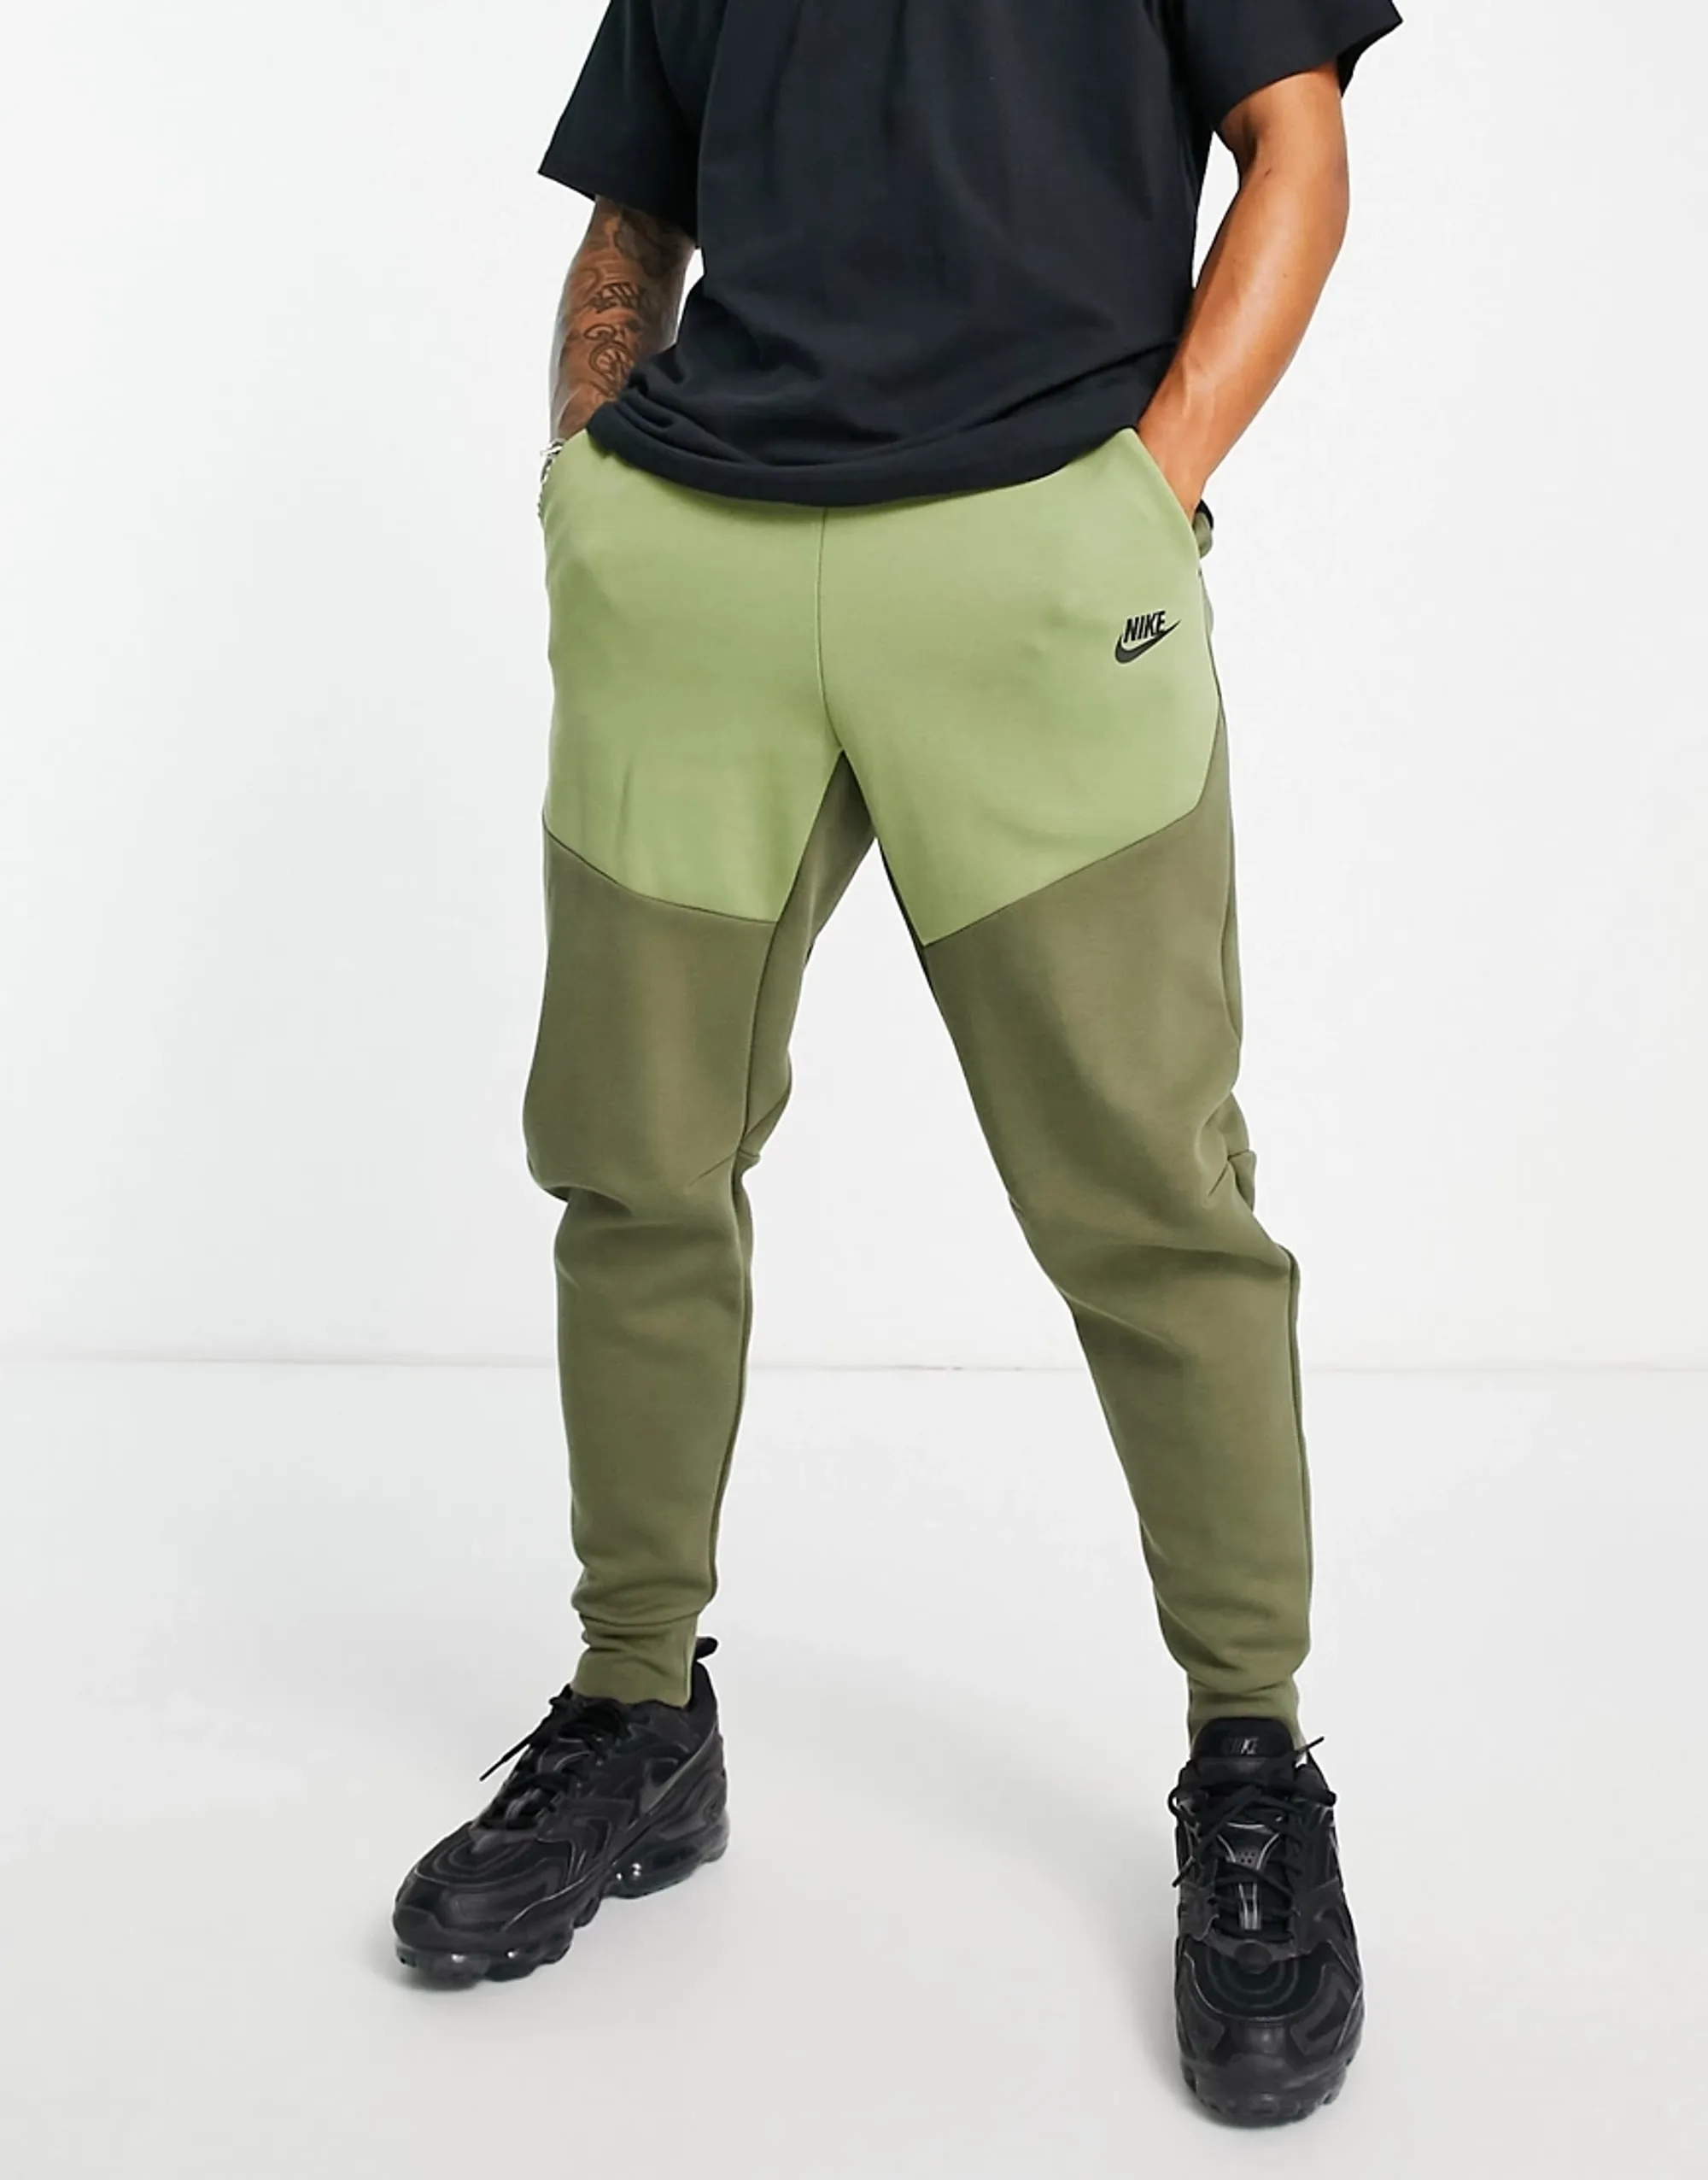 Buy OLD SCHOOL SMALL LOGO Olive Track Pants | Pitbull Store